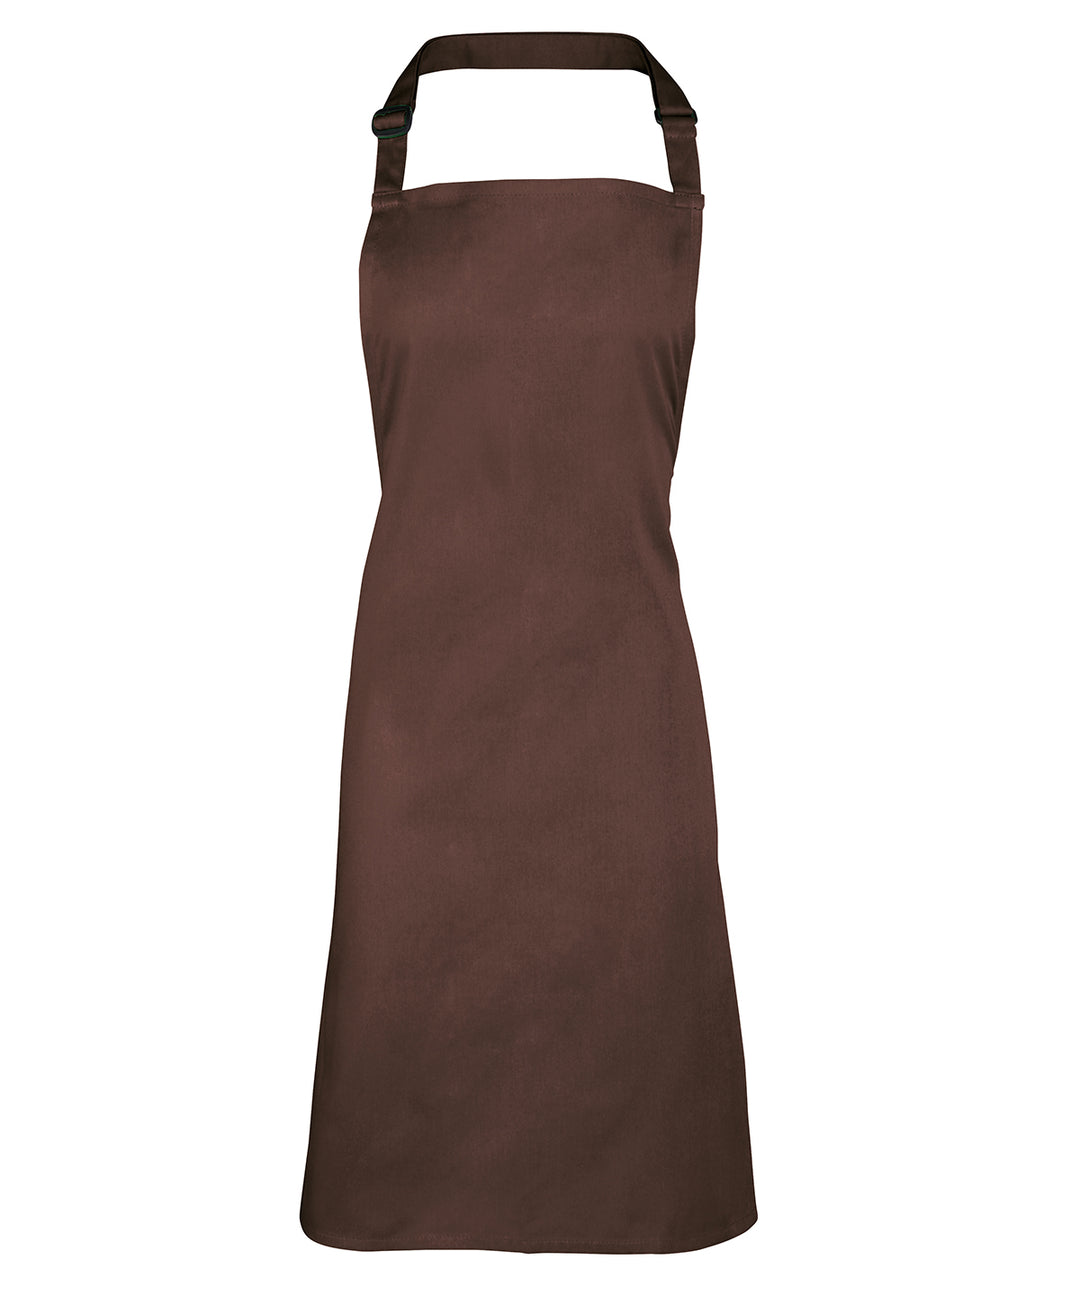 a brown apron on a white background